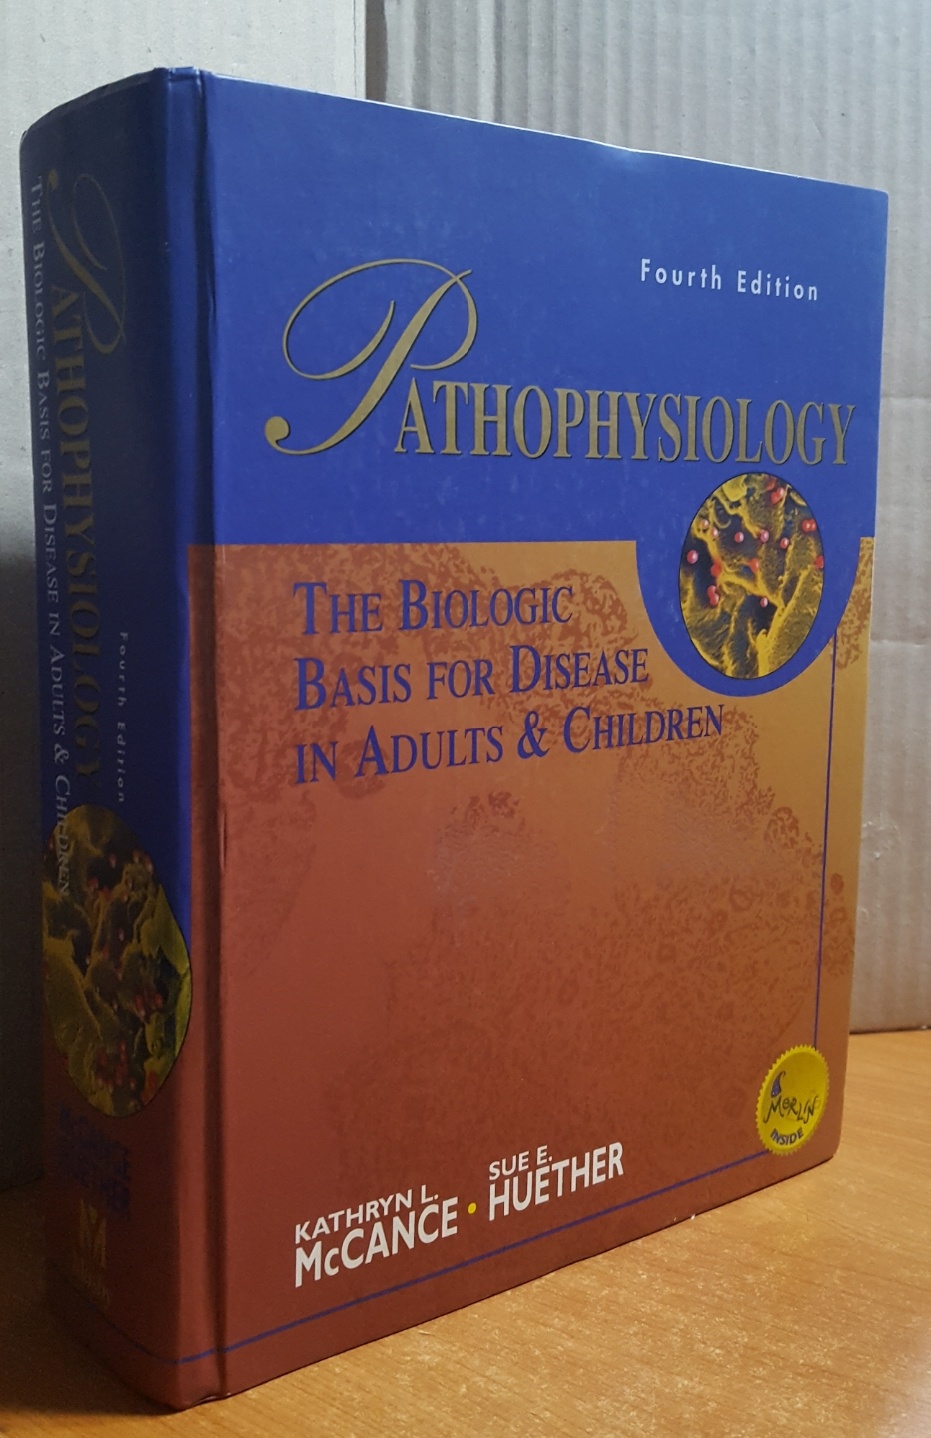 Pathophysiology: The Biologic Basis for Disease in Adults&Children